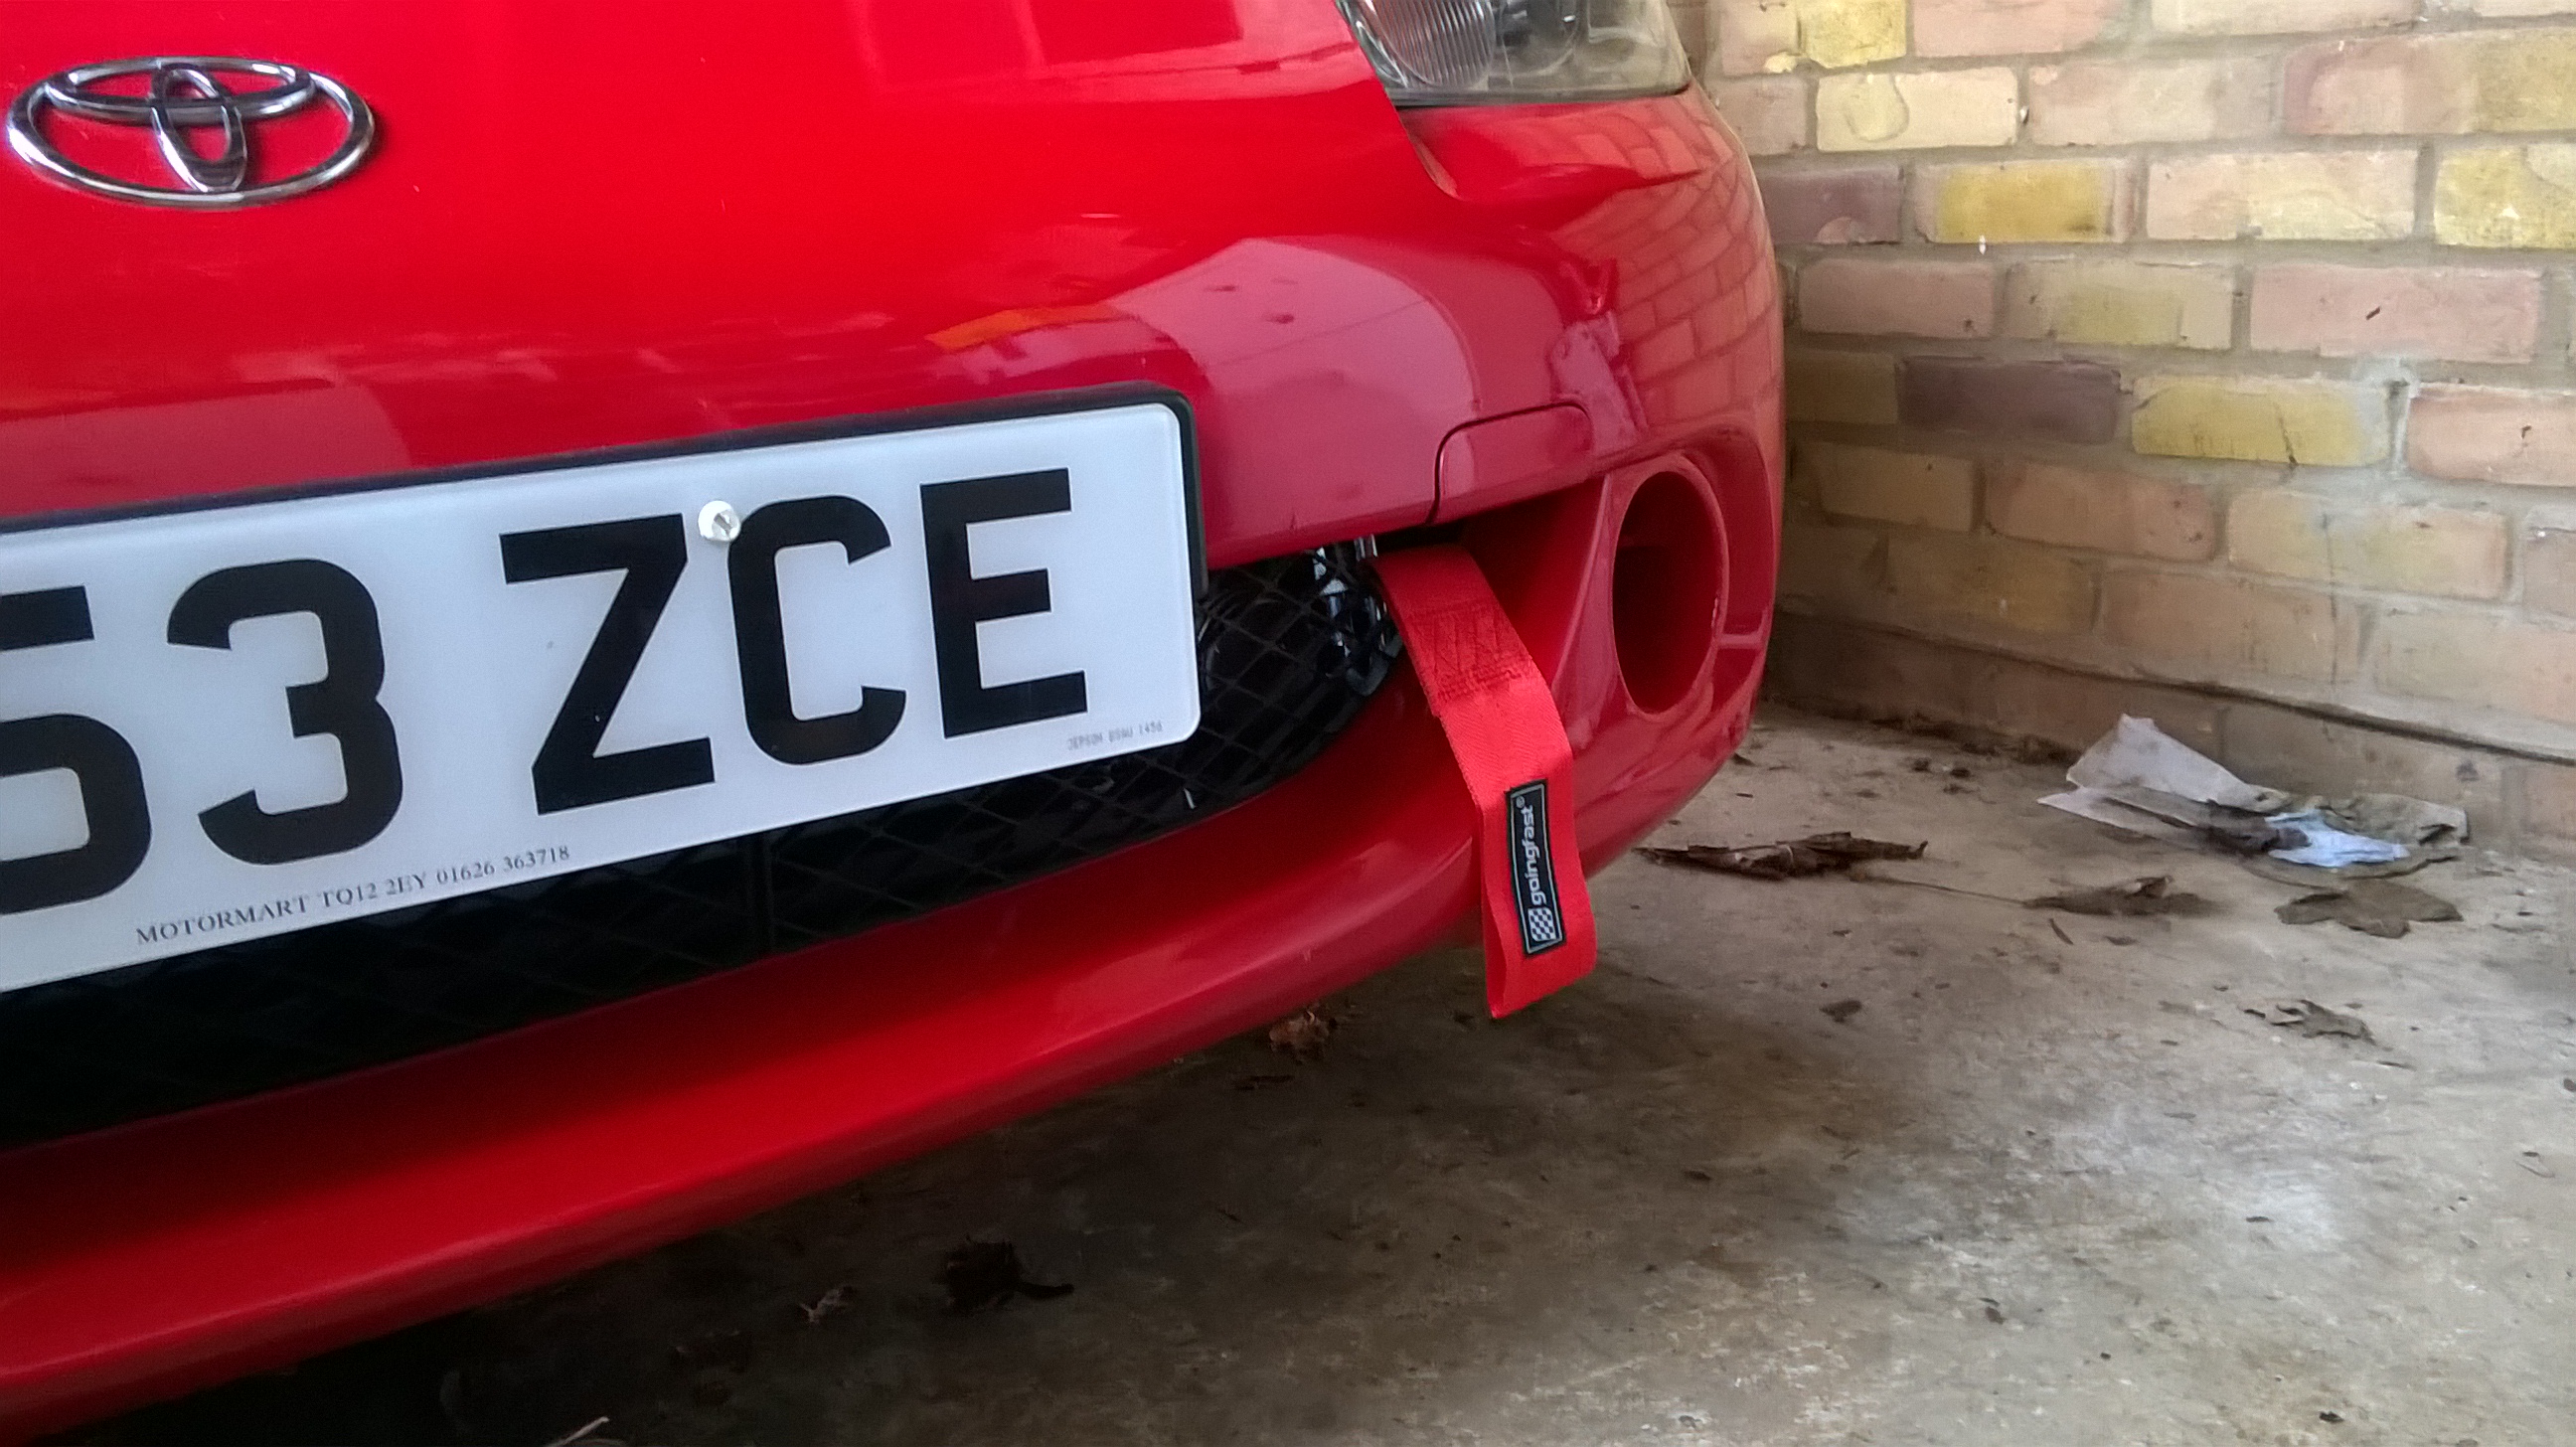 MR2 Roadster track car build - Page 14 - Readers' Cars - PistonHeads